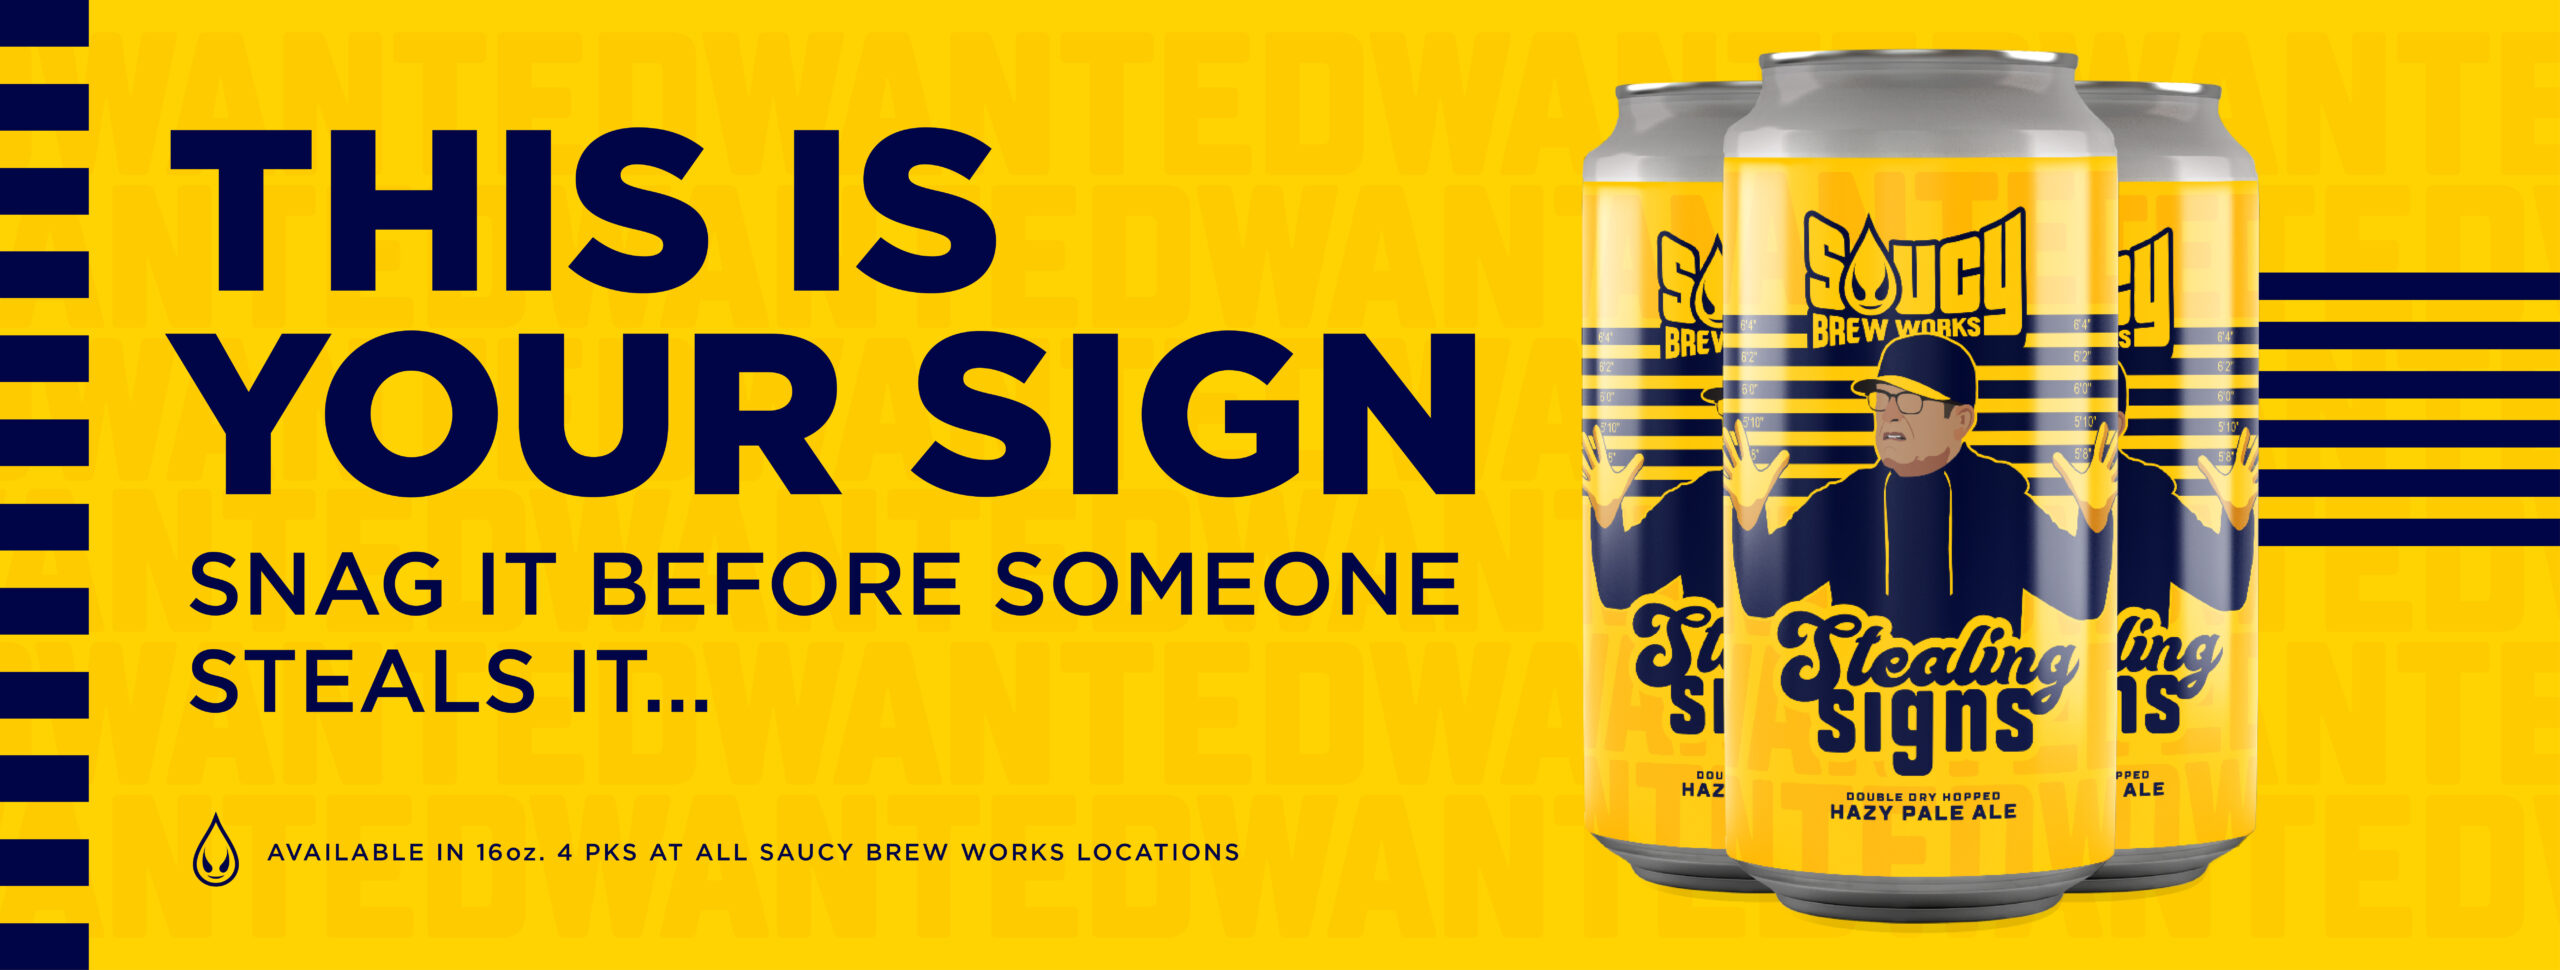 This is your sign. Snag it before someone steal it. Stealing Signs Double Dry Hopped Hazy Pale Ale. Available in 16 ounce 4 packs at all Saucy Brew Works locations.